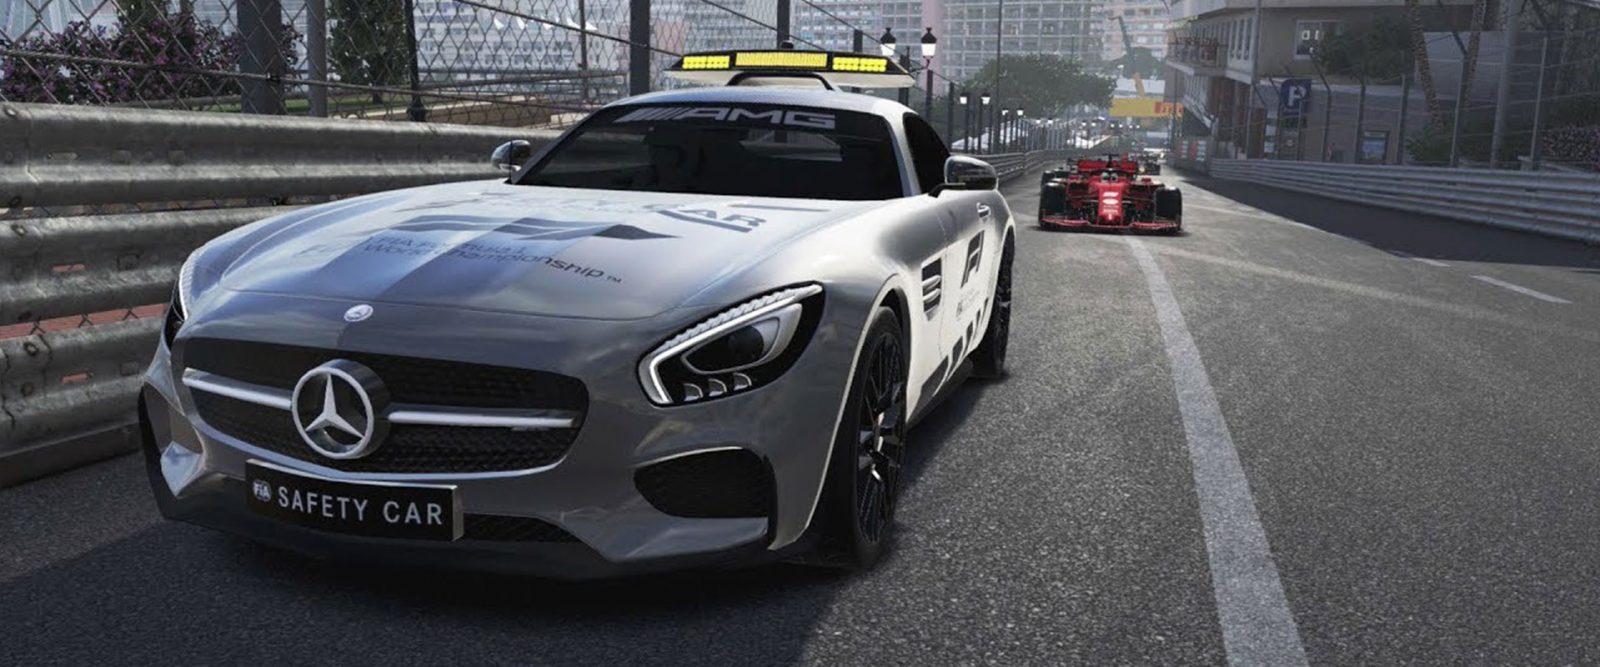 How to win races during safety car period